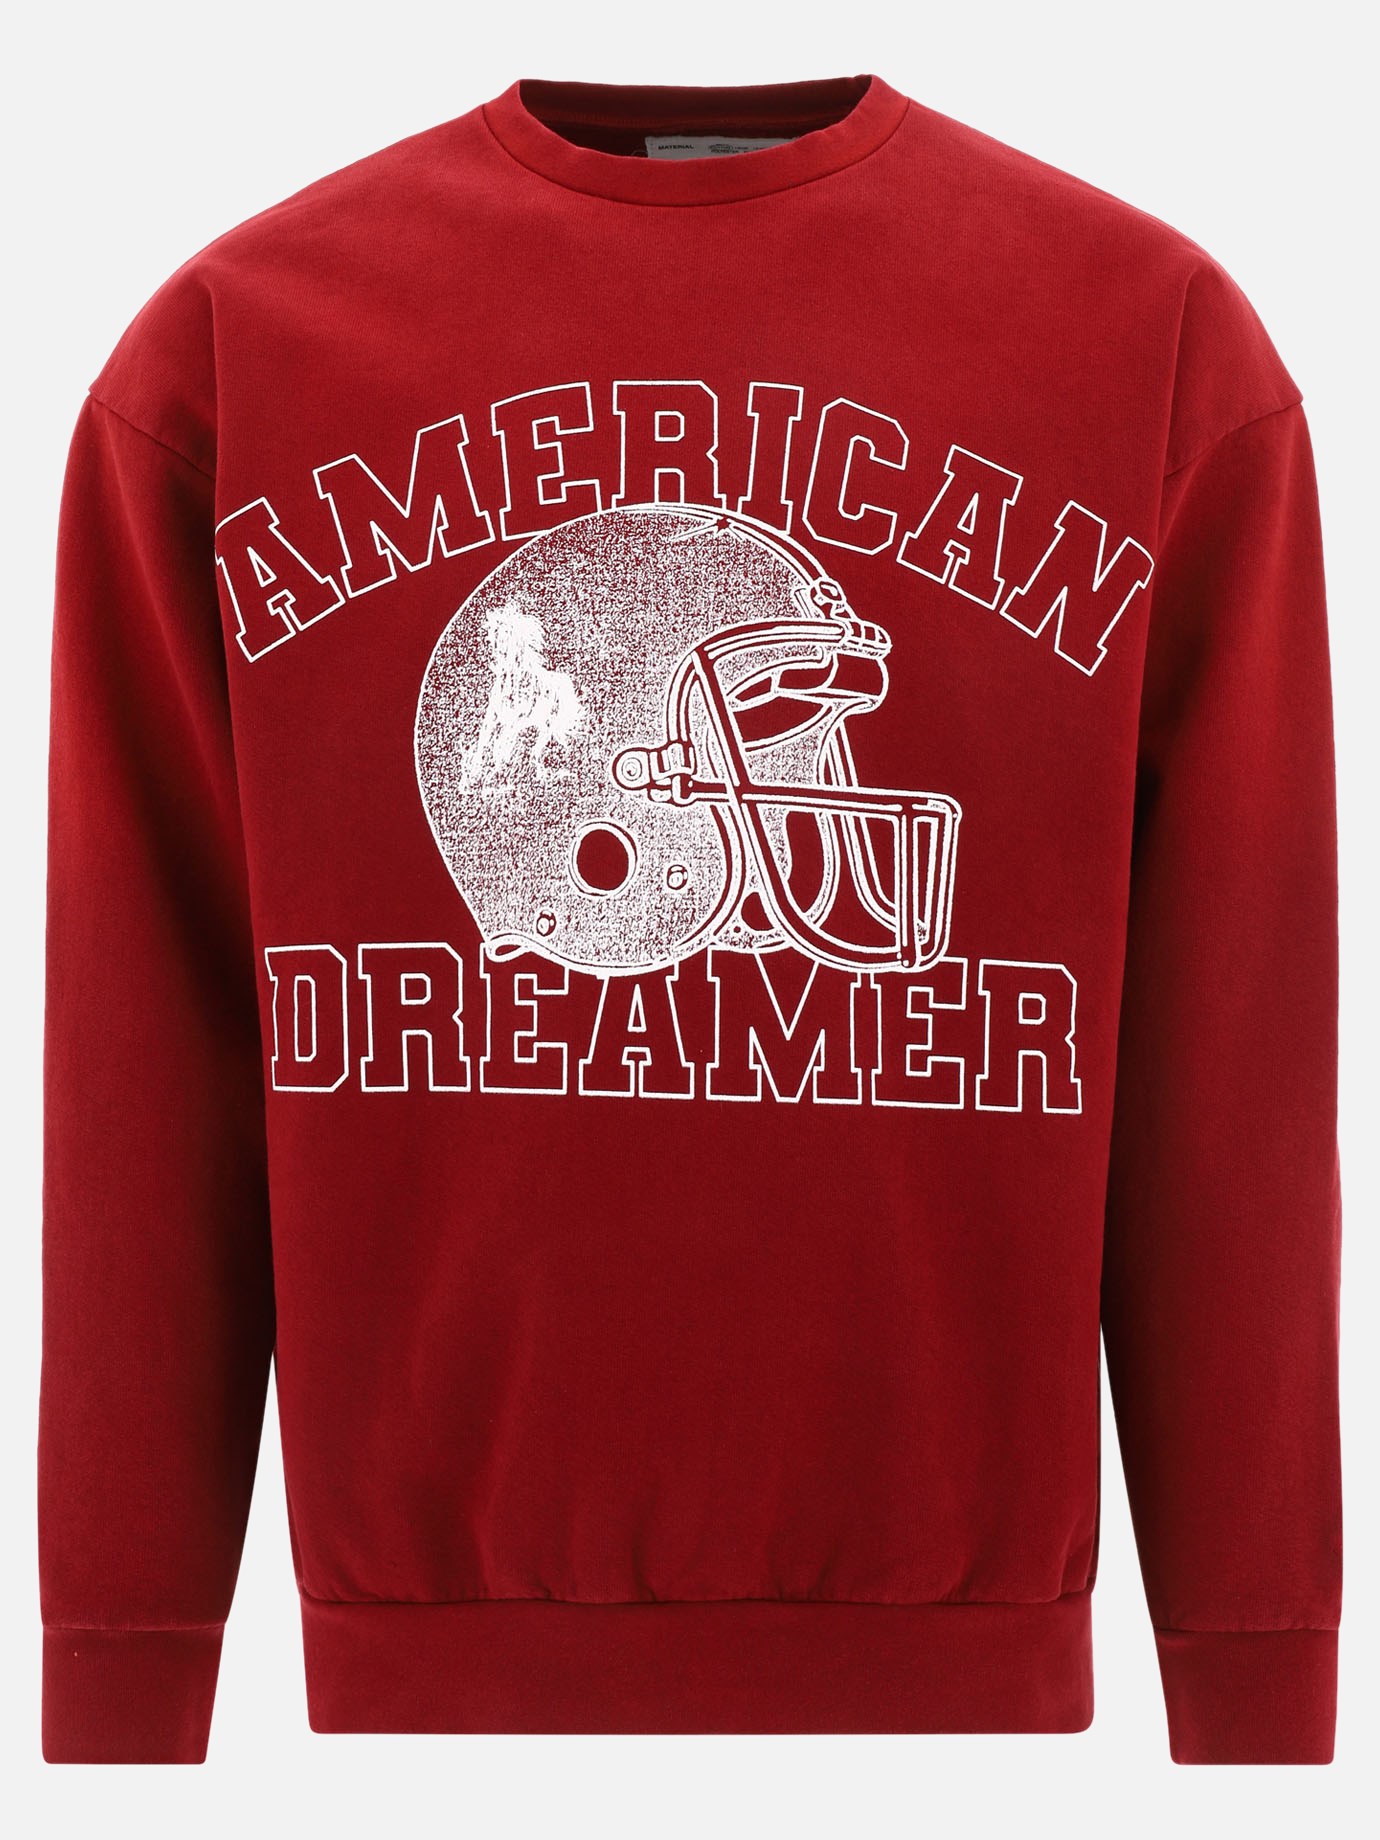  American Dreamer  sweatshirtby One Of These Days - 1